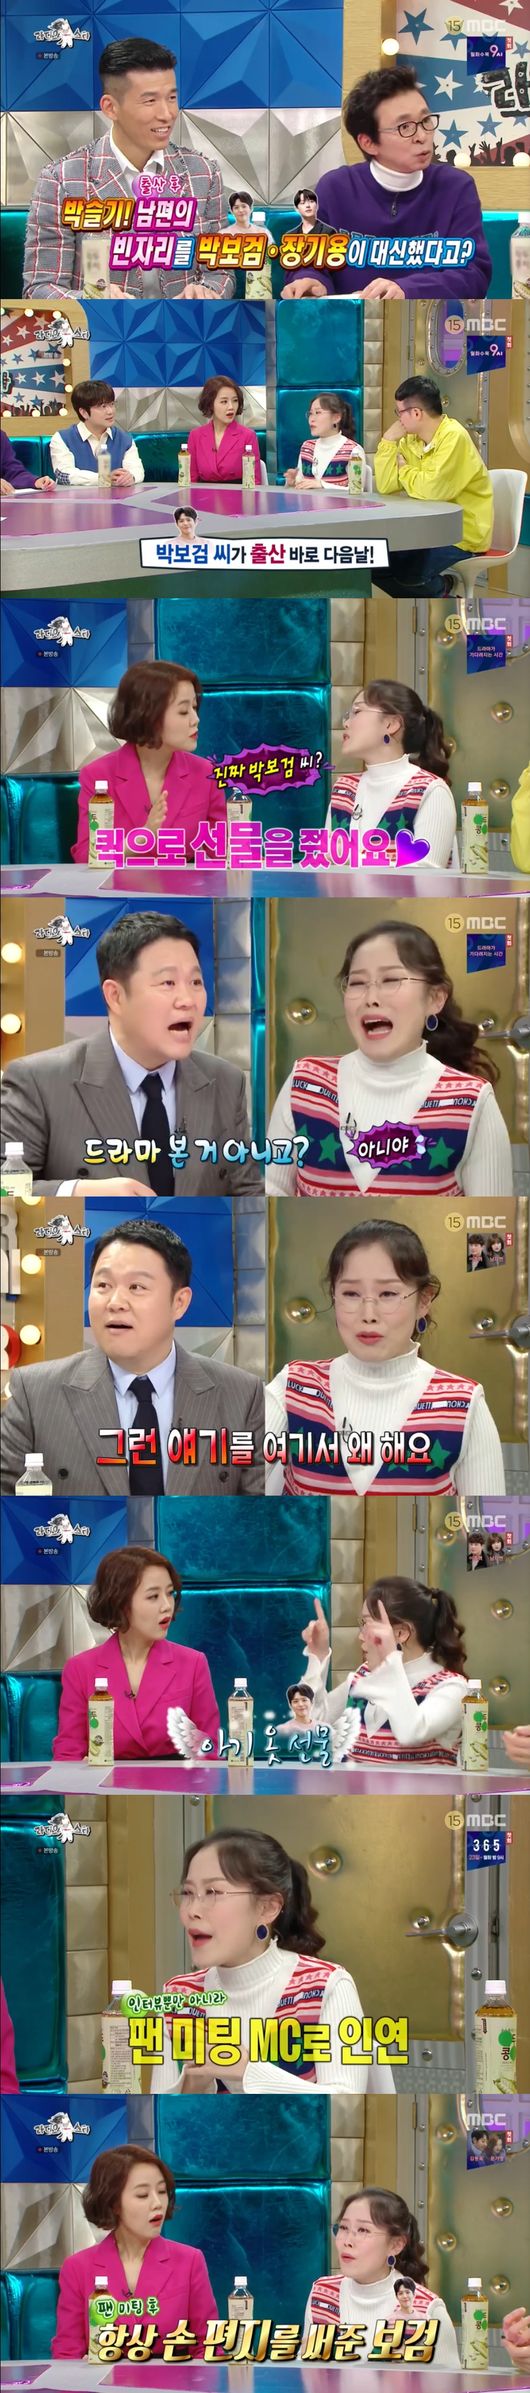 Park Seul-gi has told her husband about the anecdote she received from Park Bo-gum.Park Hyun-bin Park Seul-gi Jo Jung-chi appeared on MBC Radio Star which was broadcasted on the afternoon of the 11th on the theme of Parents are the first.Park Hyun-bin says she has no day to get married and have dry hands.I was born in Gwangmyeong and live all the time in Gwangmyeong. I know the traditional market in front of my house, so I always take care of it.My wife tells me to go in and rest, but Park Hyun-bin said that I can not leave all of them to my wife who is looking at two children alone.The image is not, but Park Hyun-bin asked, What image am I?Kim Seul-gi, who is called Gondre Mandre Image, said that Gim Gu-ra was delicate because he was busy and busy and did not think he would take it.Park Hyun-bin handed over the tips to get the bonus: Park Hyun-bin, who buys everything to live and then stands for a while to see if there is nothing more to live.When you collect such a Park Hyun-bin, the bosses give you green pepper or vegetables and say, Go eat one.Jo Jung-chi said that in front of education, he became two faces. Jo Jung-chi, who always gets information through the jungin.I do not know a lot of information, but I have to send an English kindergarten, but I was surprised to start this worry.I didnt know I was going to have this trouble. Gim Gu-ra asked, I dont think education is important because Ive been successful with music. Jo Jung-chi said, Thinking about it, musicians who came out of good college have been successful.Kim Seul-gi waited for her husbands event for herself, who was exhausted after giving birth.Park Seul-gi, who did not receive any events in the hospital room or in the kitchen, thought, I will do it when I go home, but later I knew that my husband was too busy to do that.I wanted to be comforted by Savoies small one, but there was no such thing, he said.Park Seul-gi received a gift from Park Bo-gum the day after giving birth: Park Seul-gi, who received a package of baby clothes and her own calendar.Park Bo-gum always wrote a hand letter for Park Seul-gi, who always had a fan meeting.Park Bo-gum, who knew the due date was 13 days and waited for the birth of Park Seul-gi from then on.Park Seul-gi, who was contacted by the office to deliver a gift, did not forget his thrill at the time. Another star, Jang Gi-yong, received a letter congratulating her on giving birth.I would have been comforted enough that I didnt get it from my husband, Sean said, looking at the letters Park Seul-gi received.Park Seul-gi said she cried while talking about her husband during a pre-interview, while saying right.I often say my husband loves me, he said, and I was moved to tears. Gim Gu-ra was confused, saying, I show Savoie various feelings today.MBC Radio Star broadcast screen capture